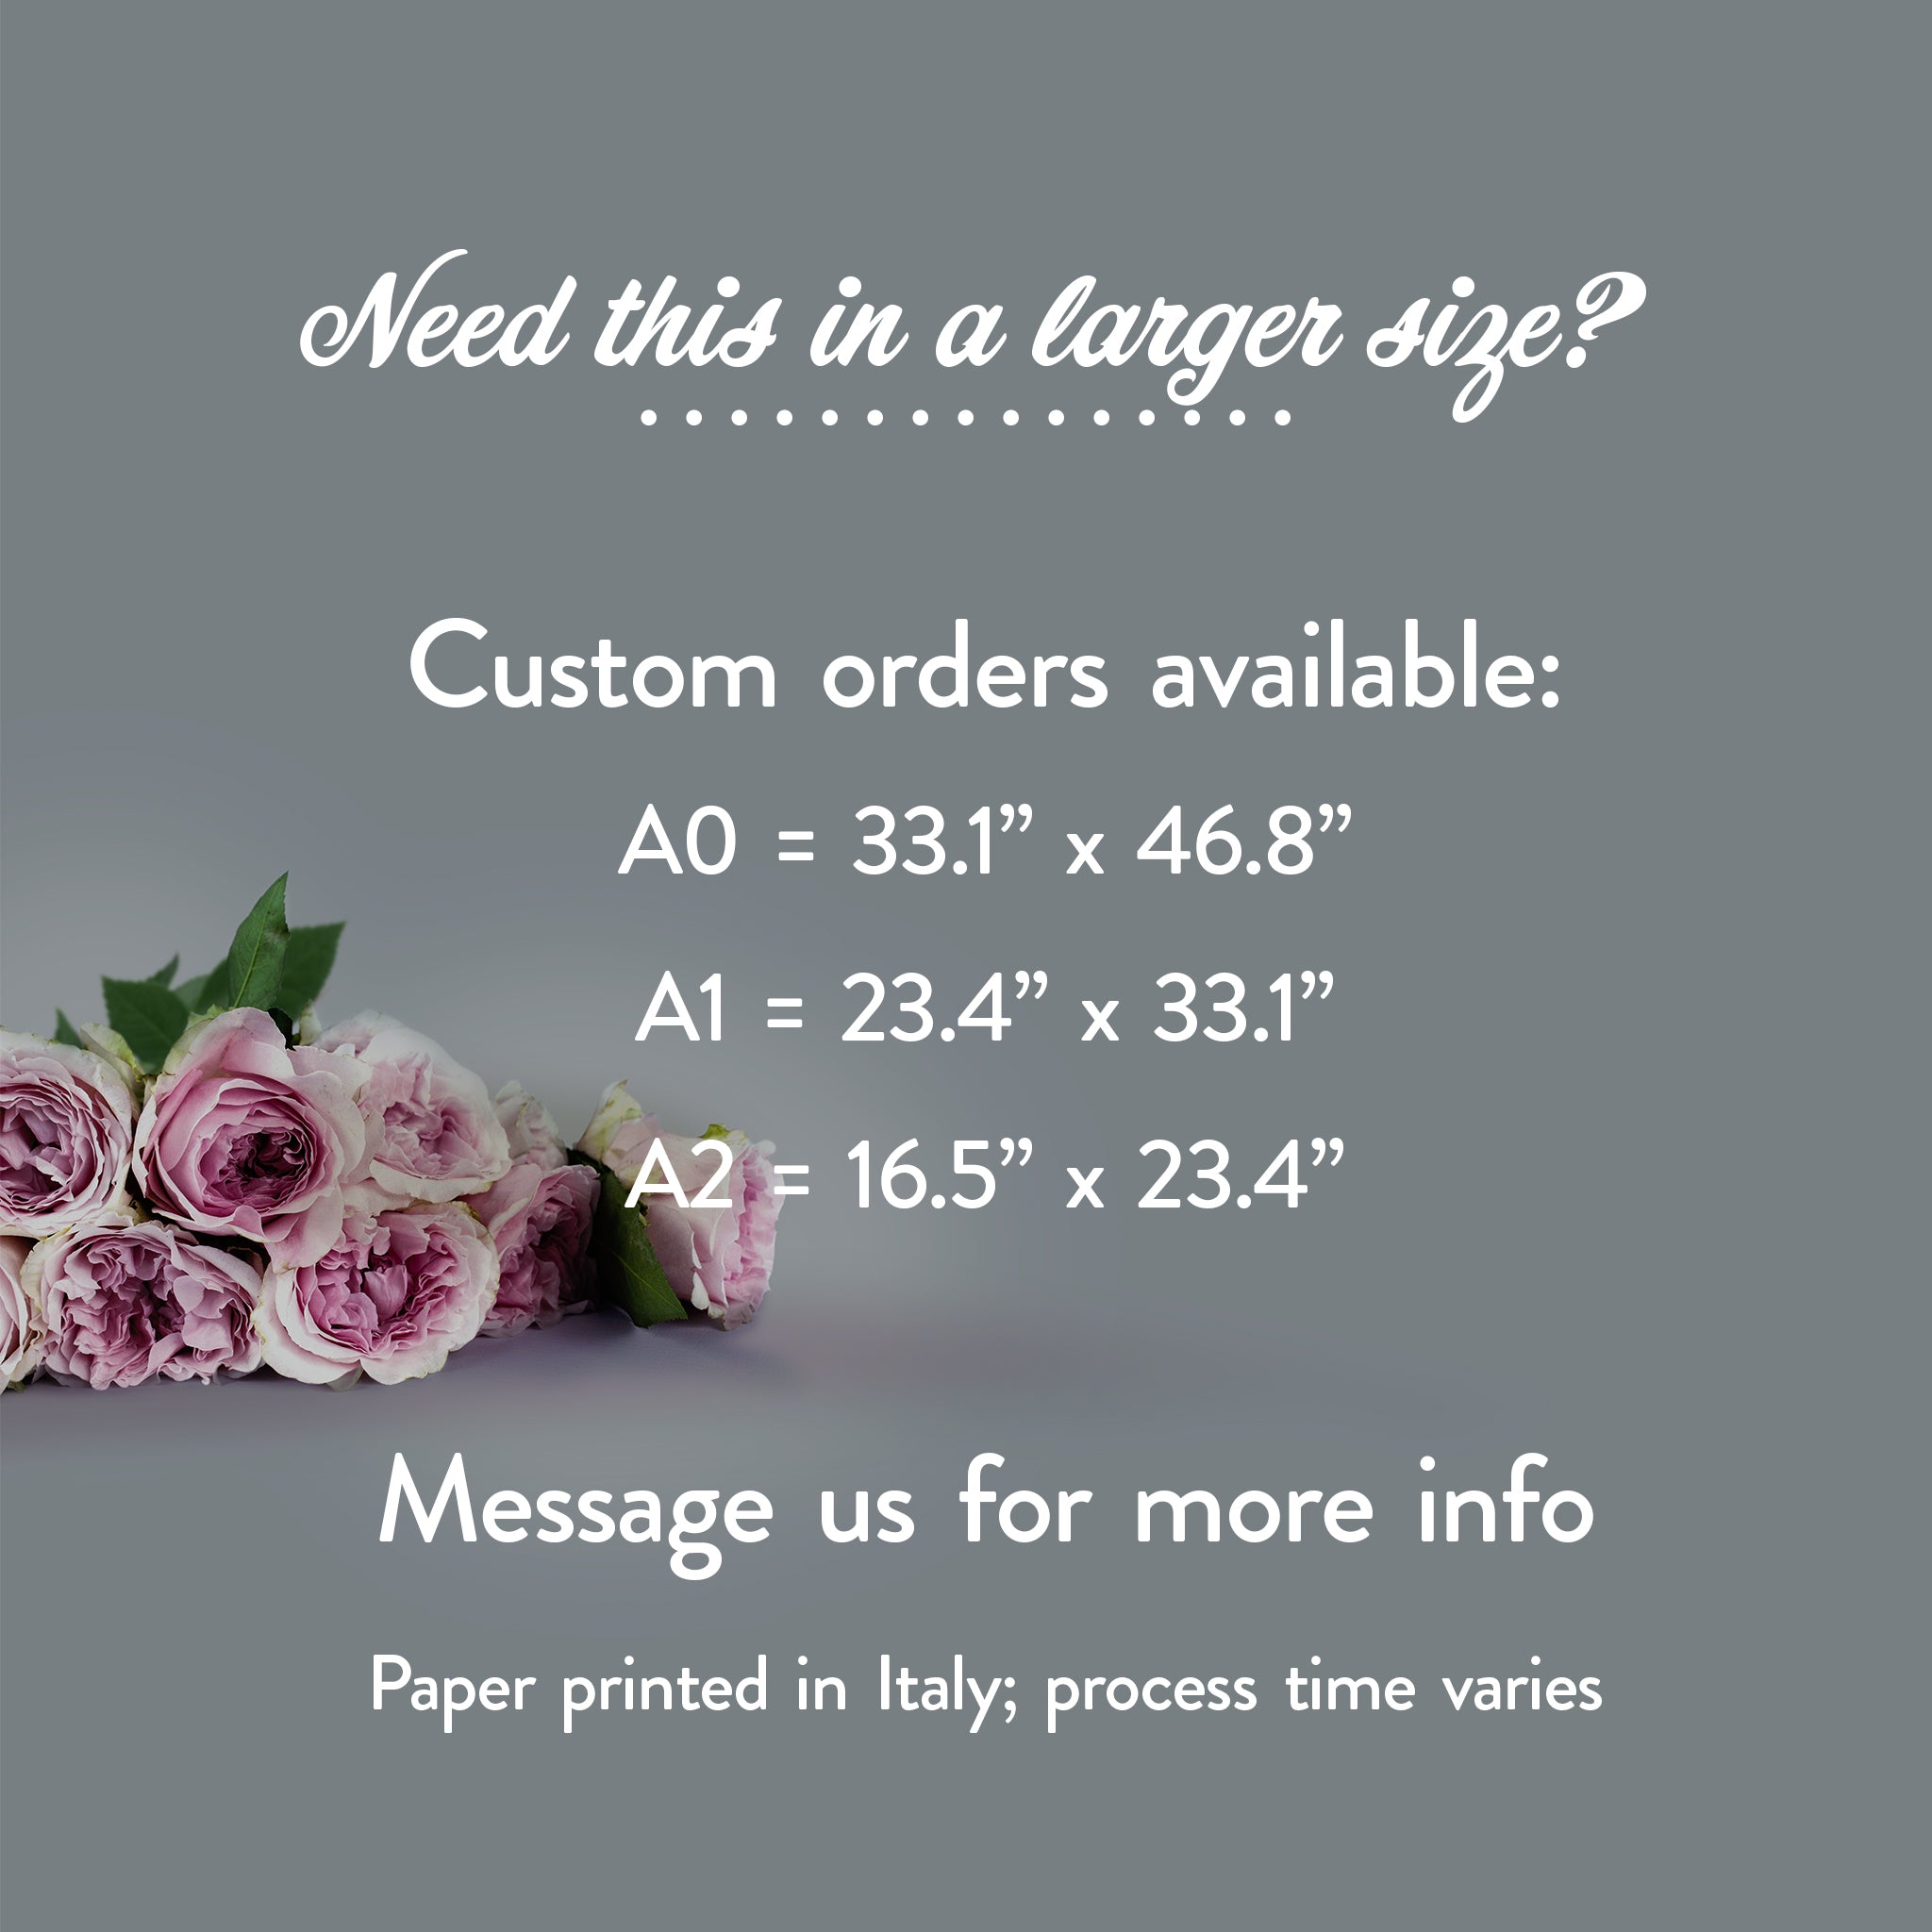 A grey background with a bouquet of roses. White text is shown that reads: Need this in a larger size? Custom orders available: A0 = 33.1” x 46.8”, A1 = 23.4” x 33.1”, A2 = 16.5” x 23.4”. Message us for more info. Paper printed in Italy; process time varies.